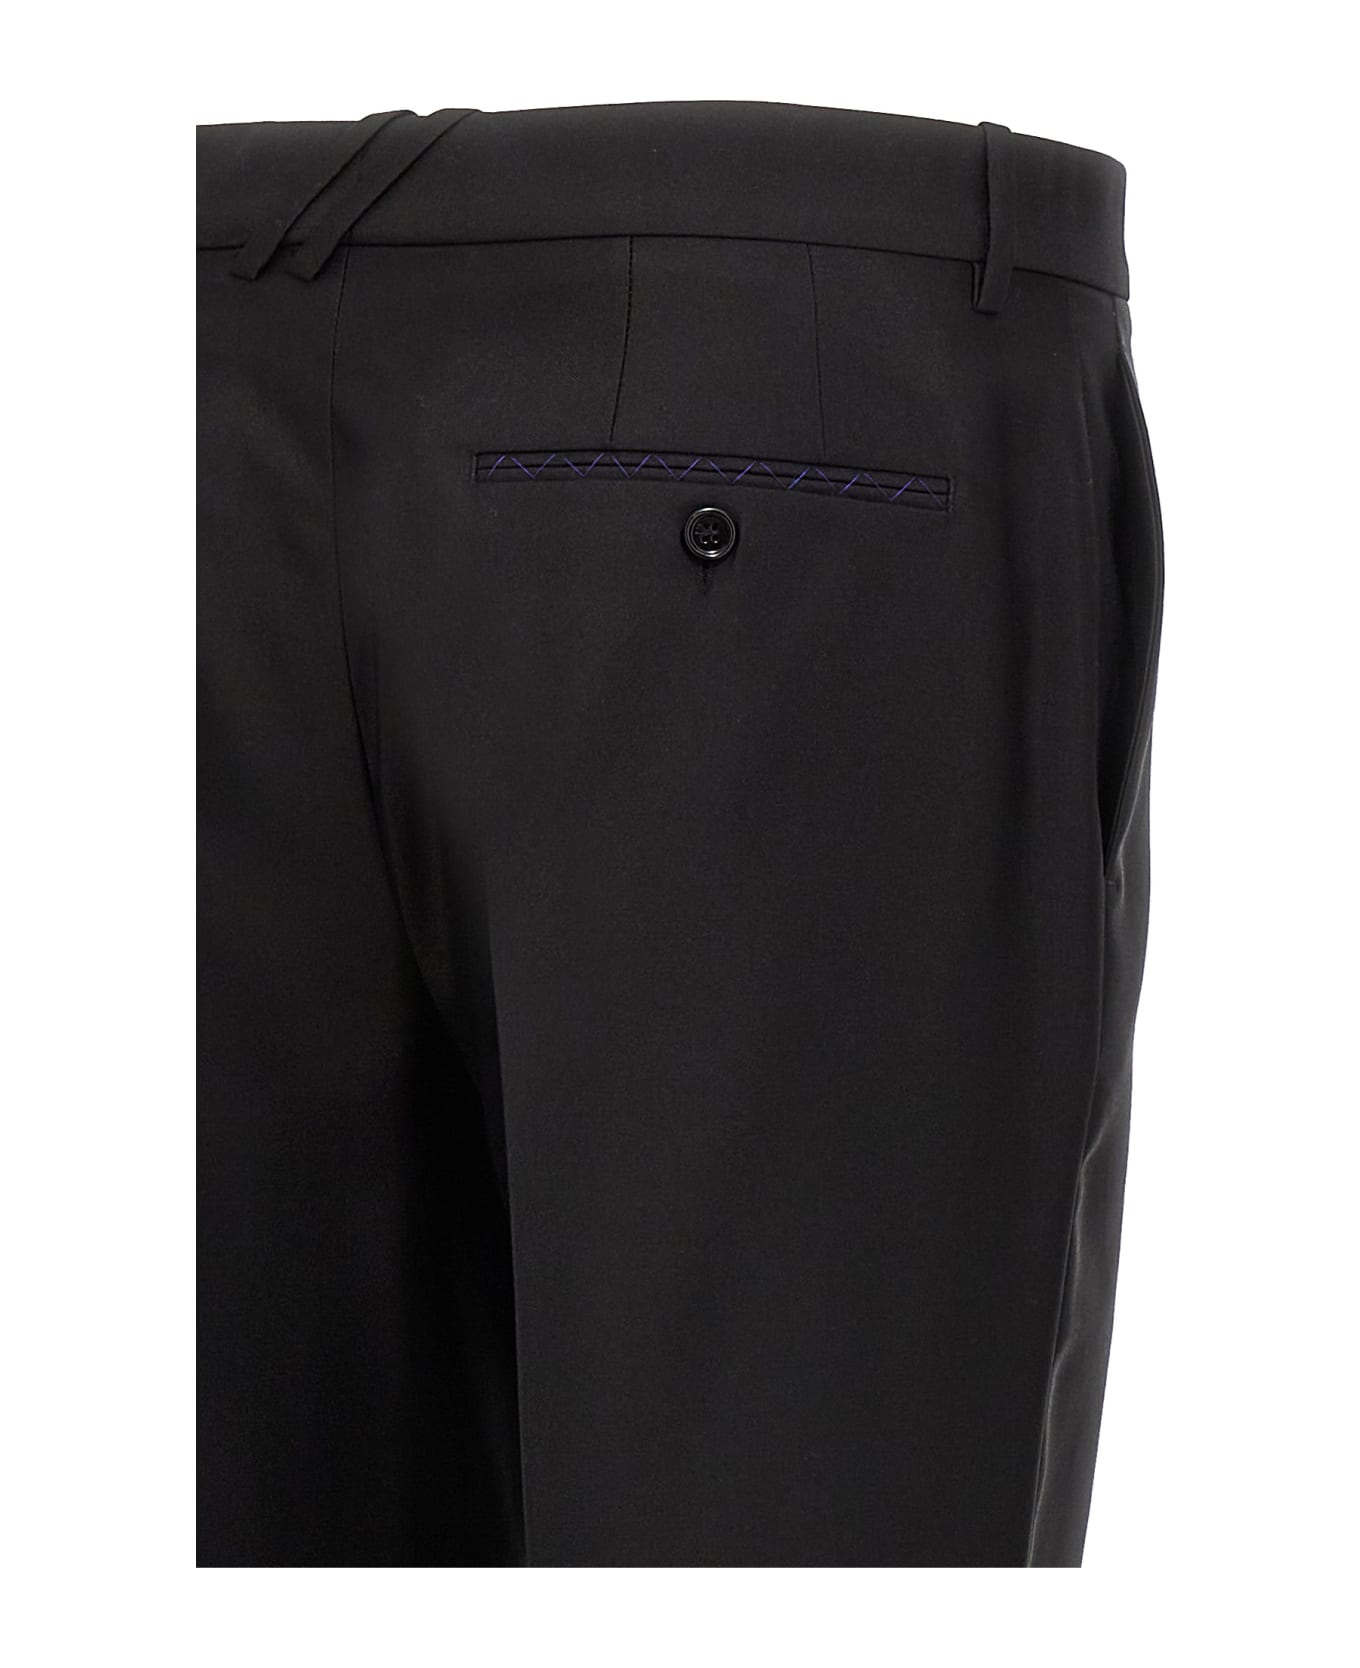 Burberry Tailored Trousers - Black